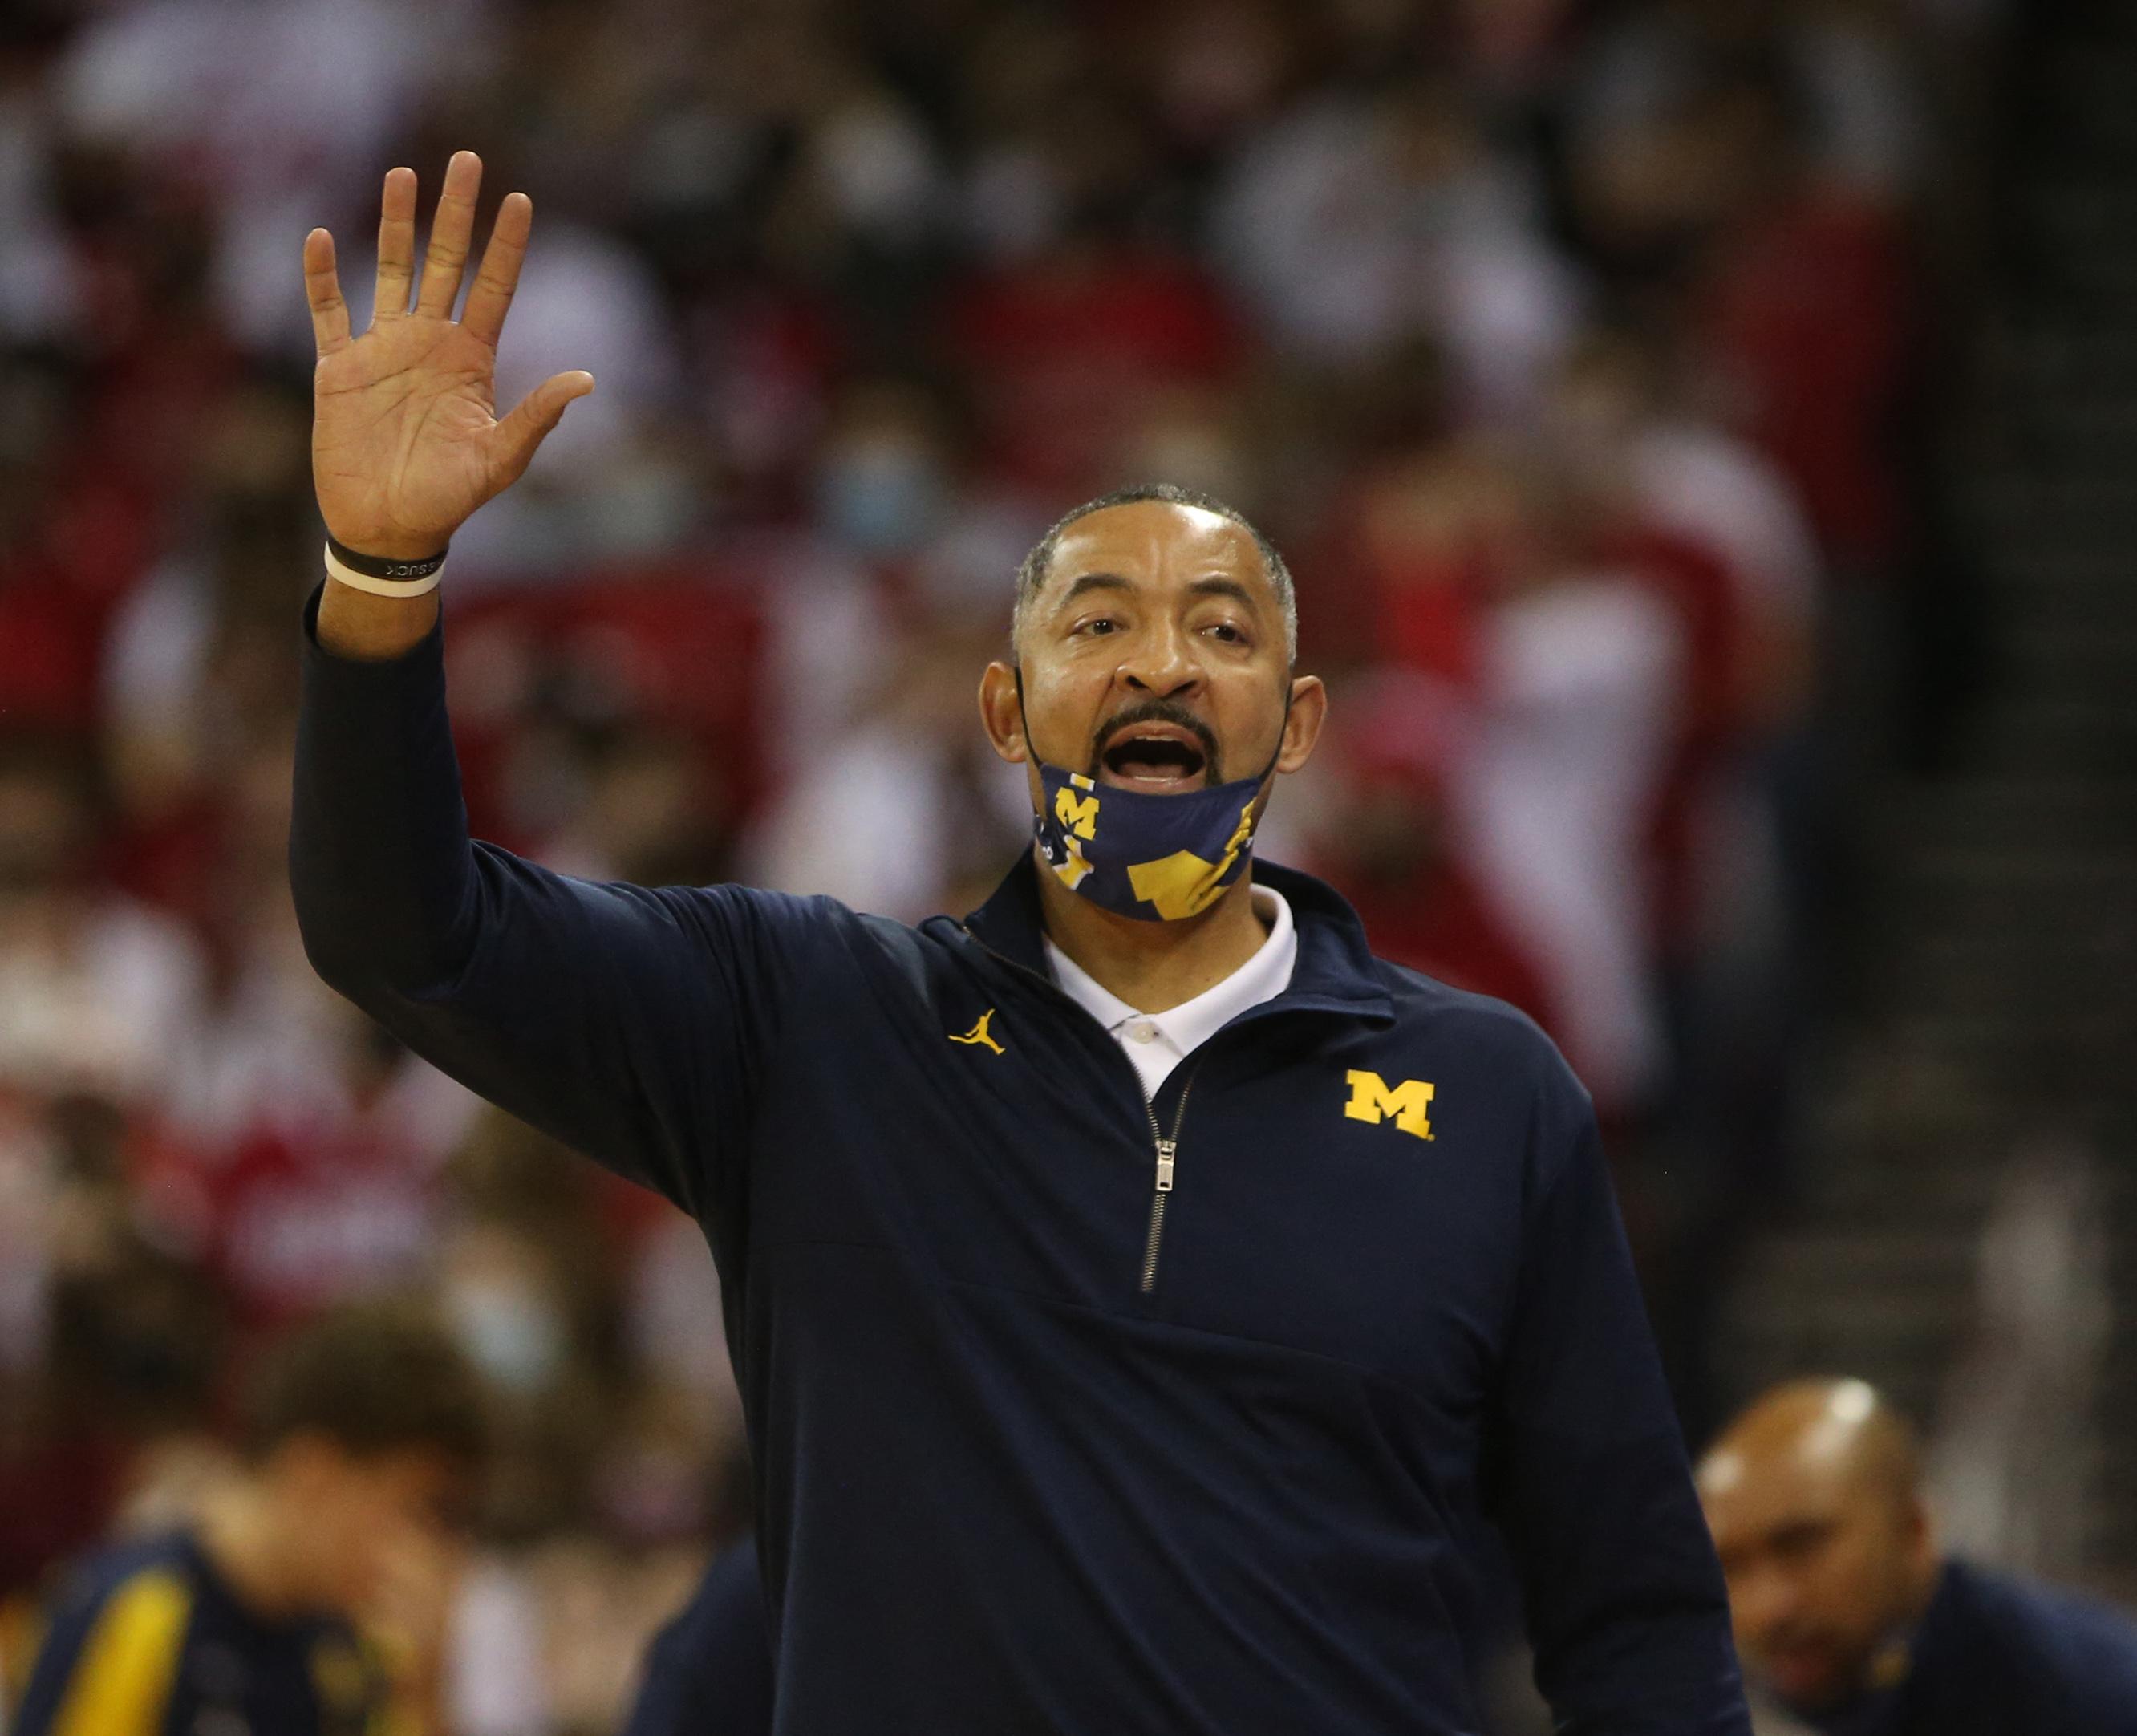 Michigan coach Juwan Howard throws punch in postgame altercation | GMA News  Online